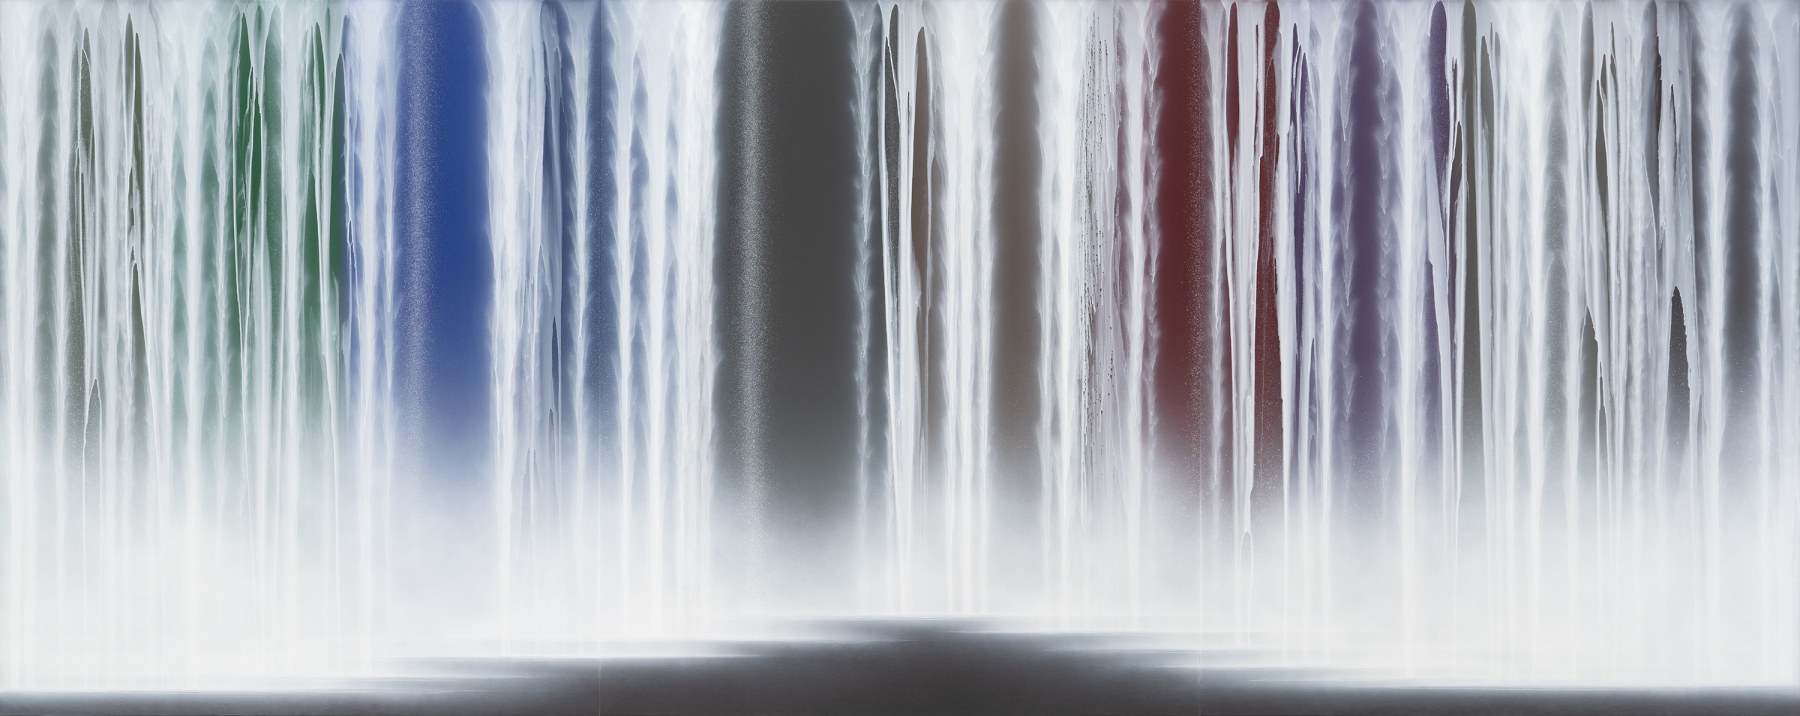 Waterfall on Colors
2022, 193.9 x 486.3 cm